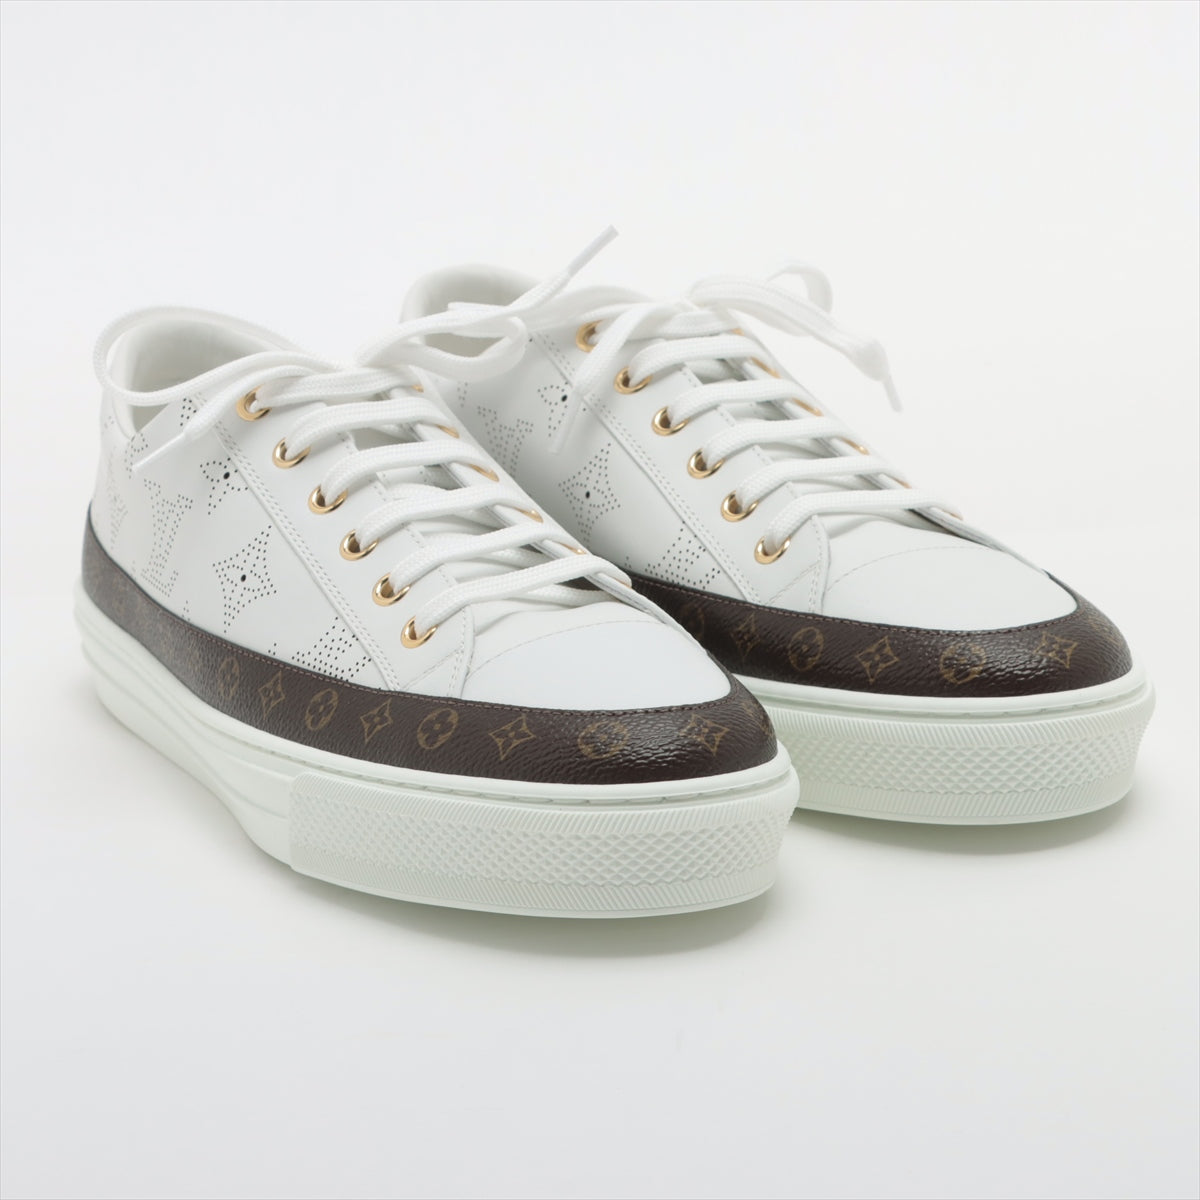 Louis Vuitton Stellar line 20 years PVC & leather High-top Sneakers 40 Ladies' White x brown VL0230 Monogram Is there a replacement string